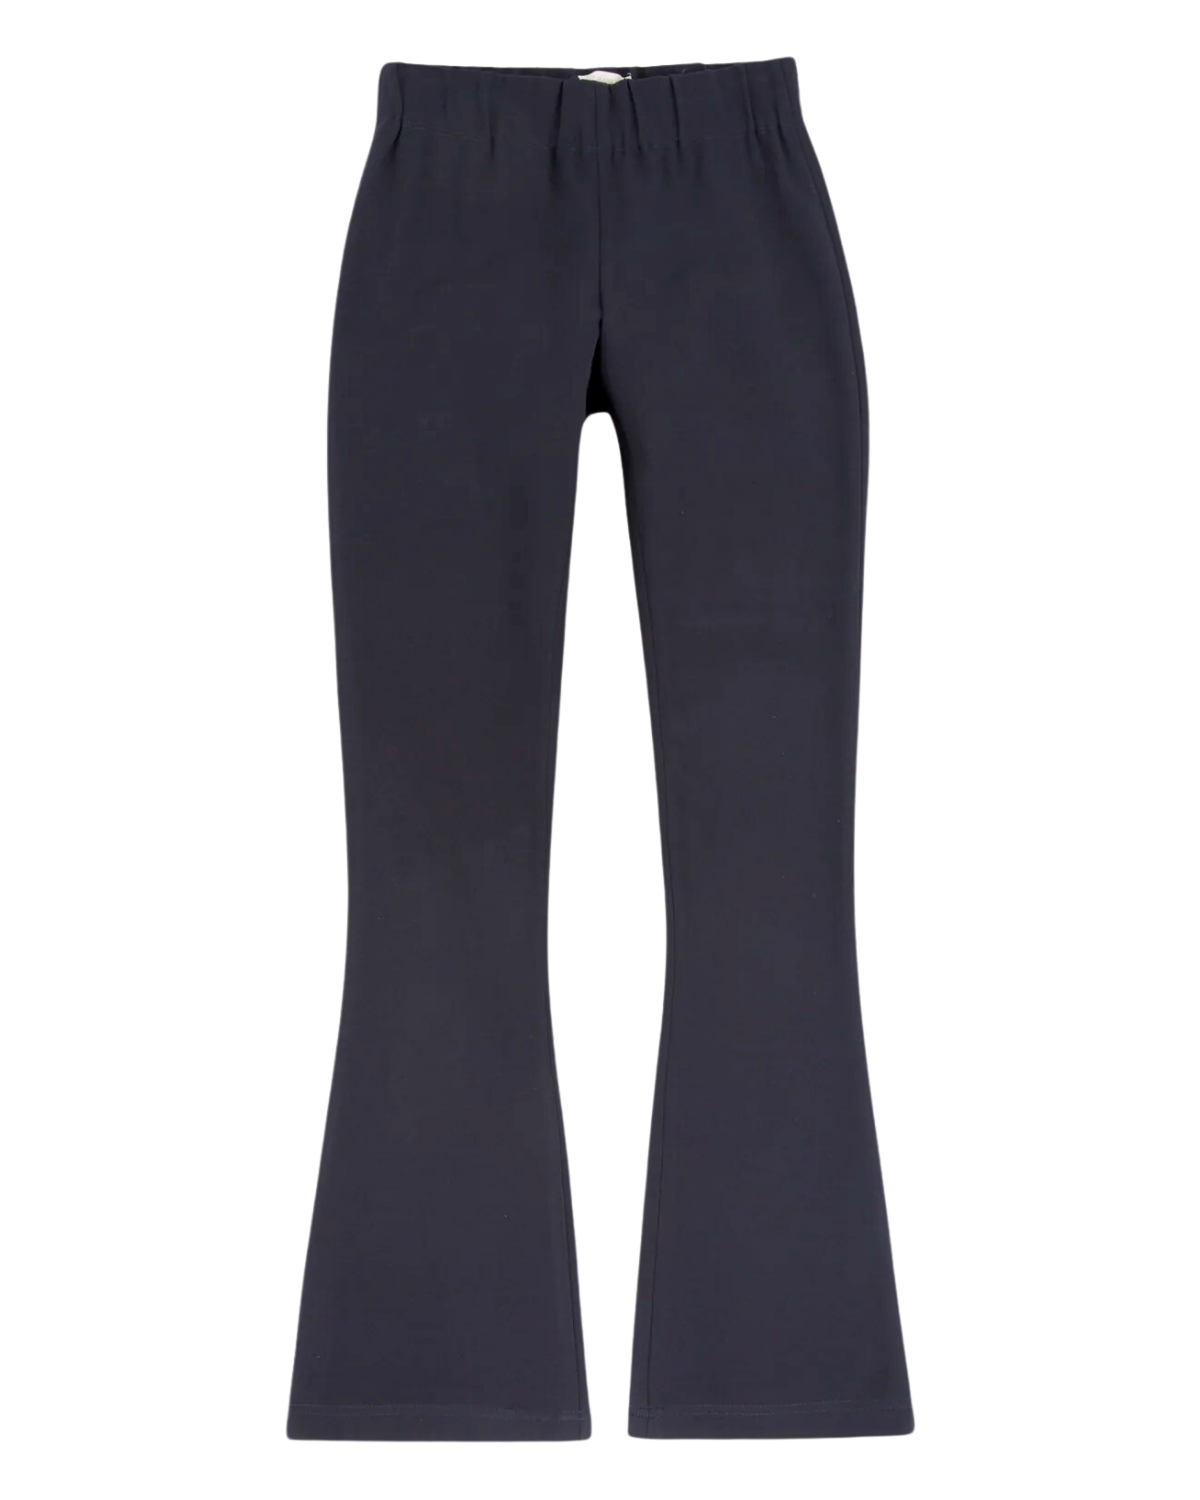 Faye Flare Cropped Pant (Navy Knit)